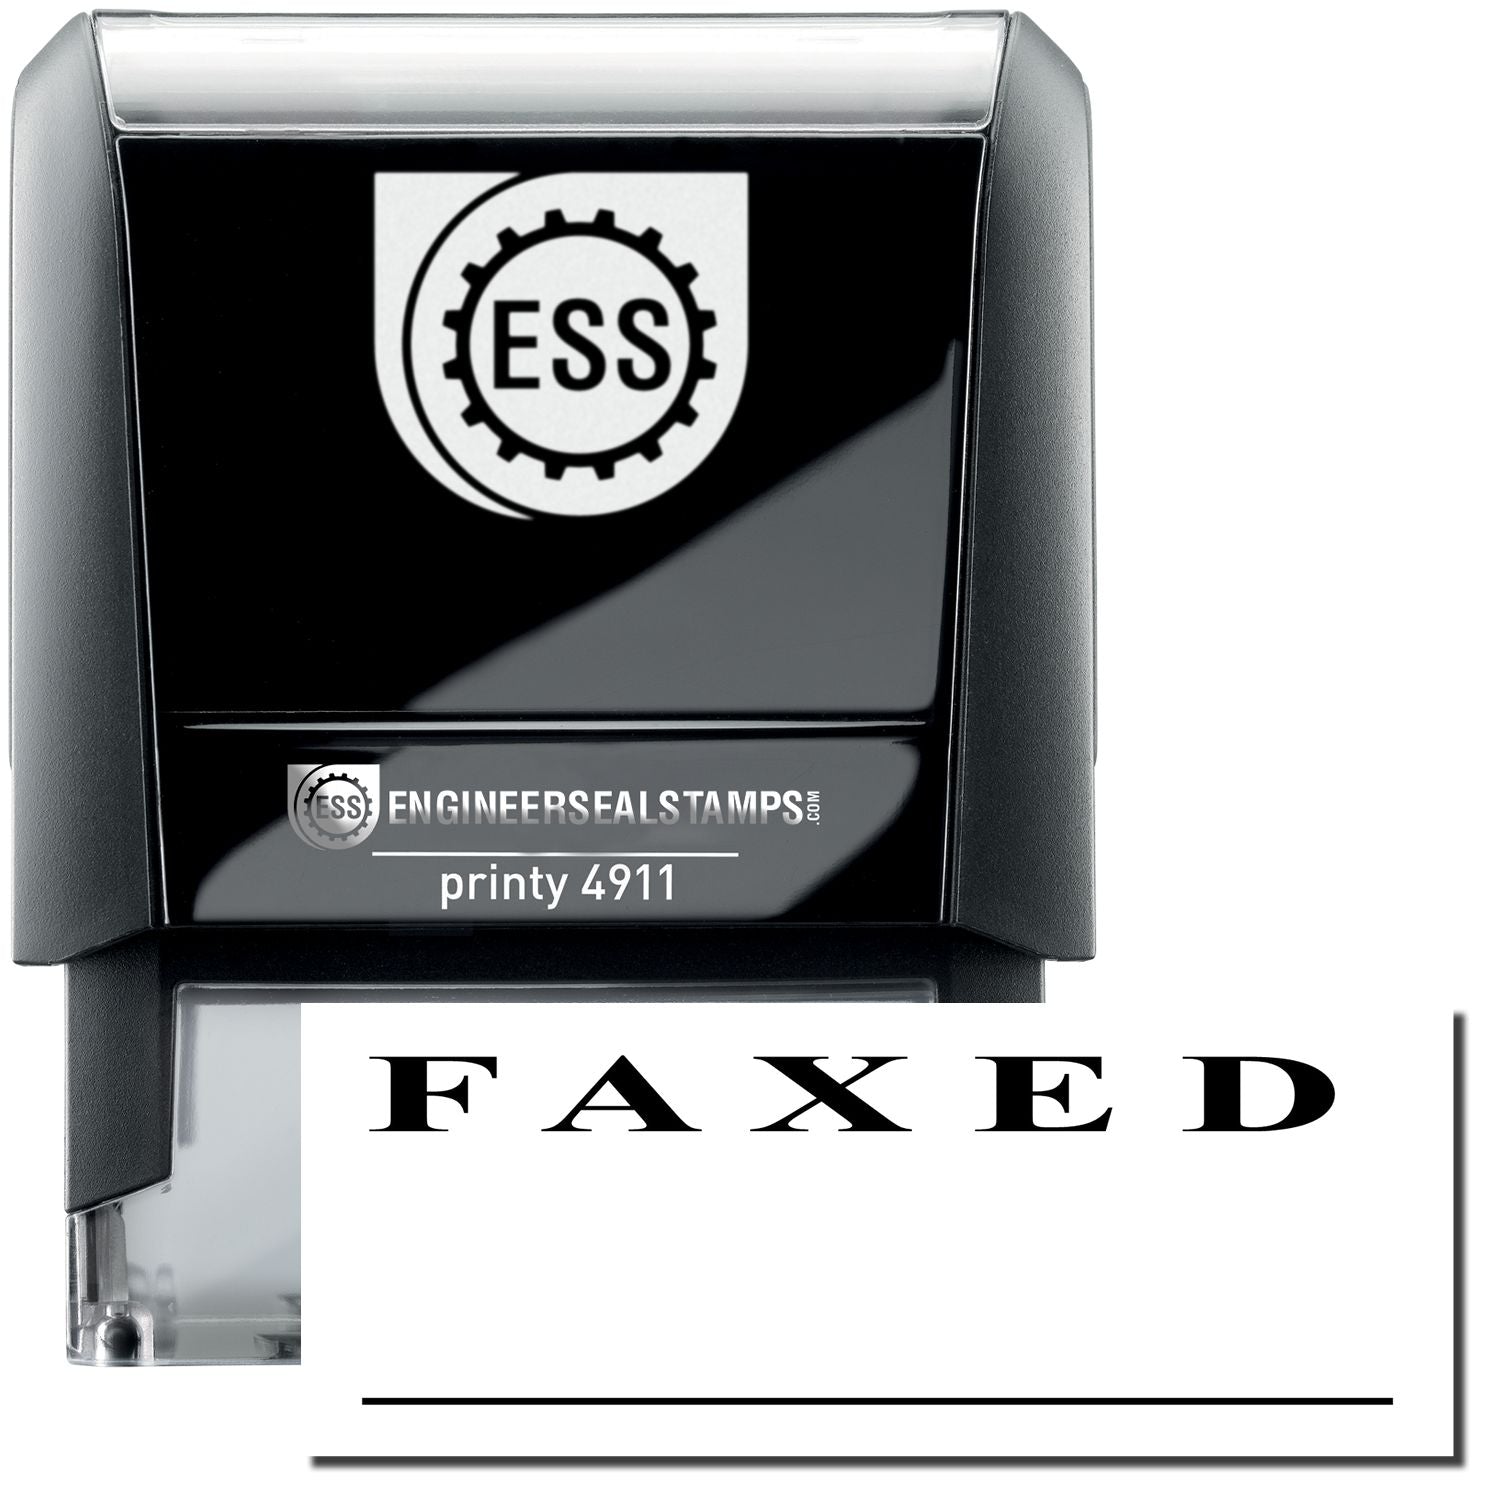 A self-inking stamp with a stamped image showing how the text "FAXED" with a line under it is displayed after stamping.